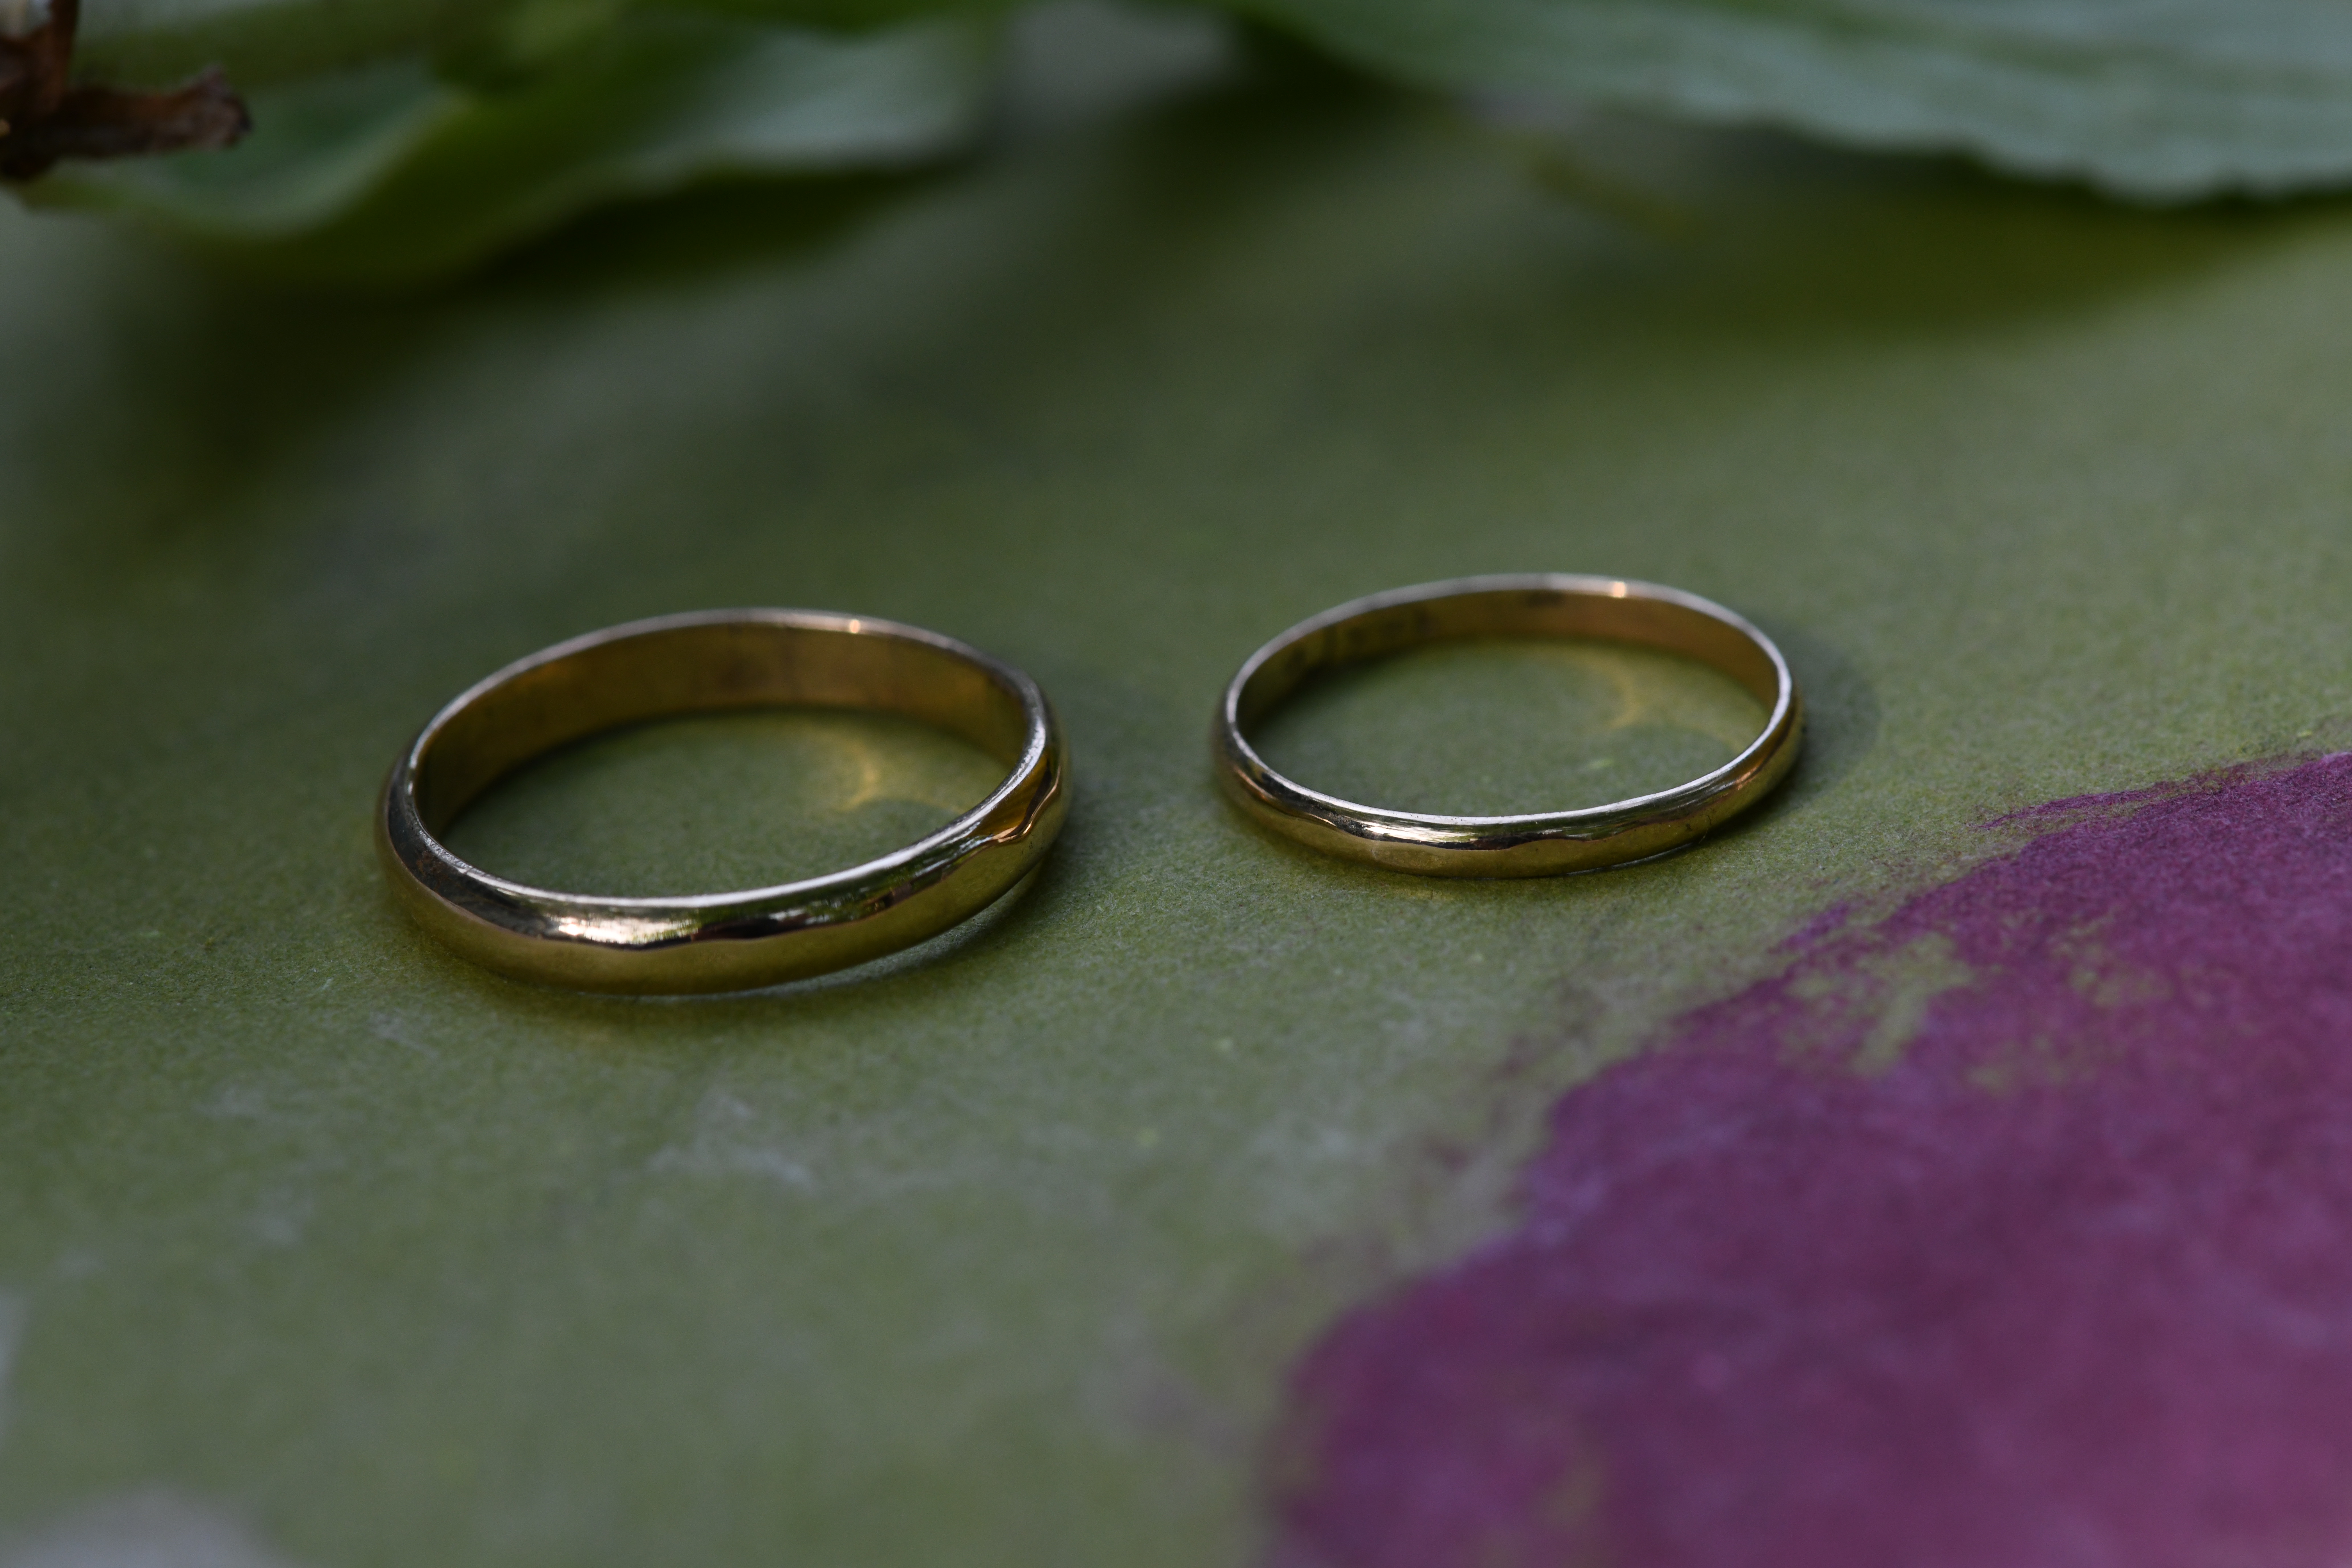 Two half round gold bands, his and hers 14k gold wedding rings